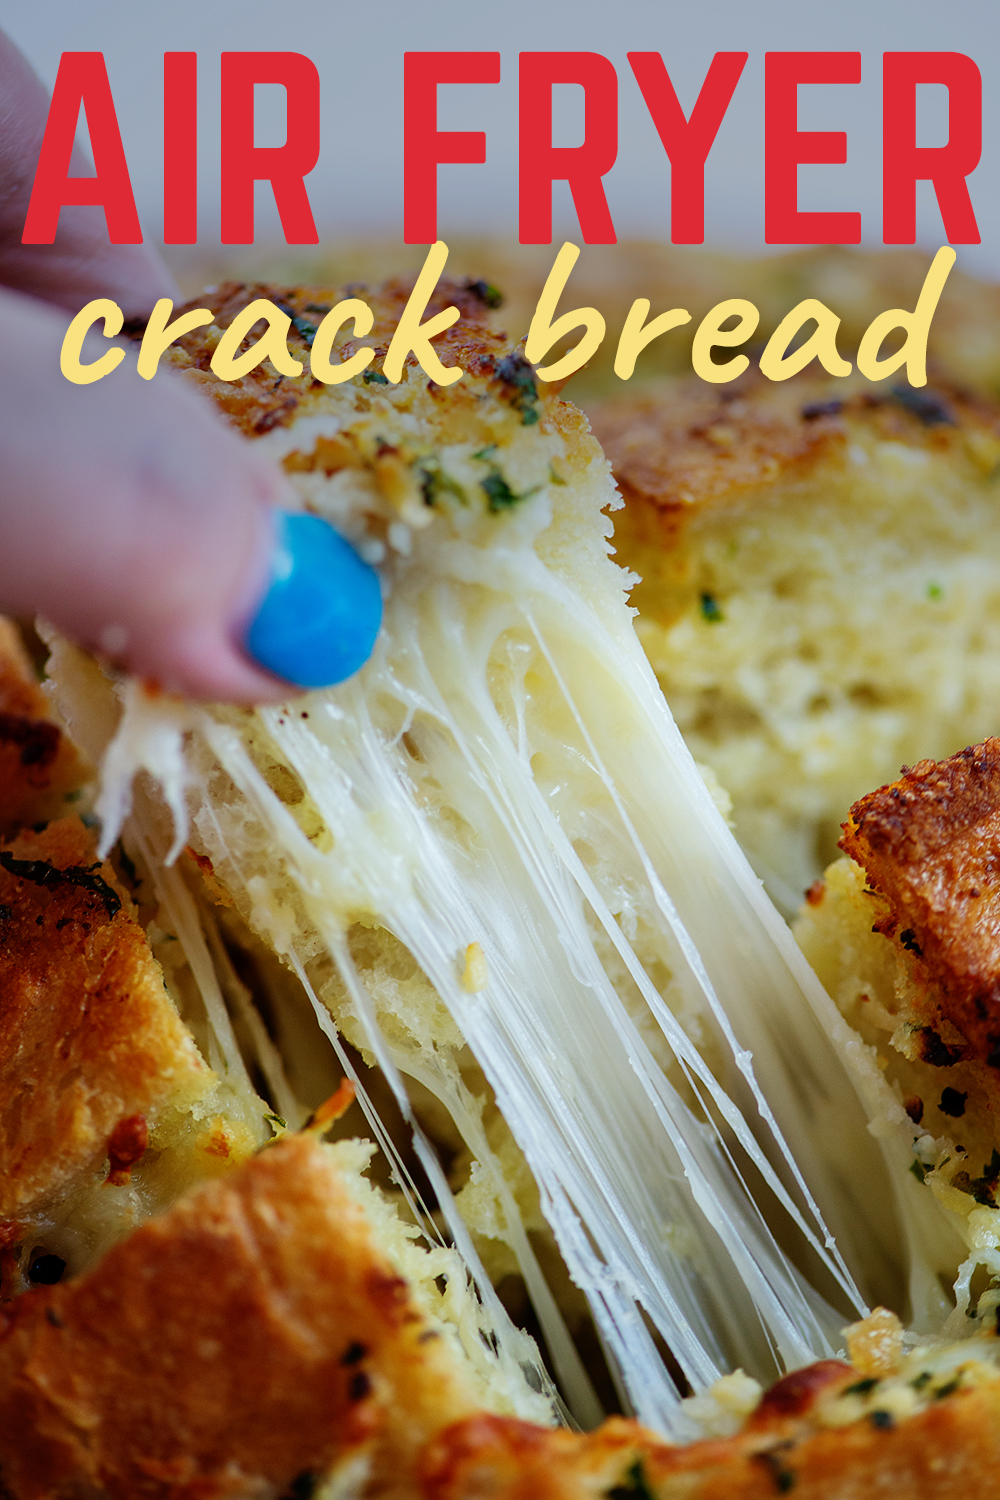 So cheesy and loaded with garlic butter! This air fryer crack bread is a favorite!